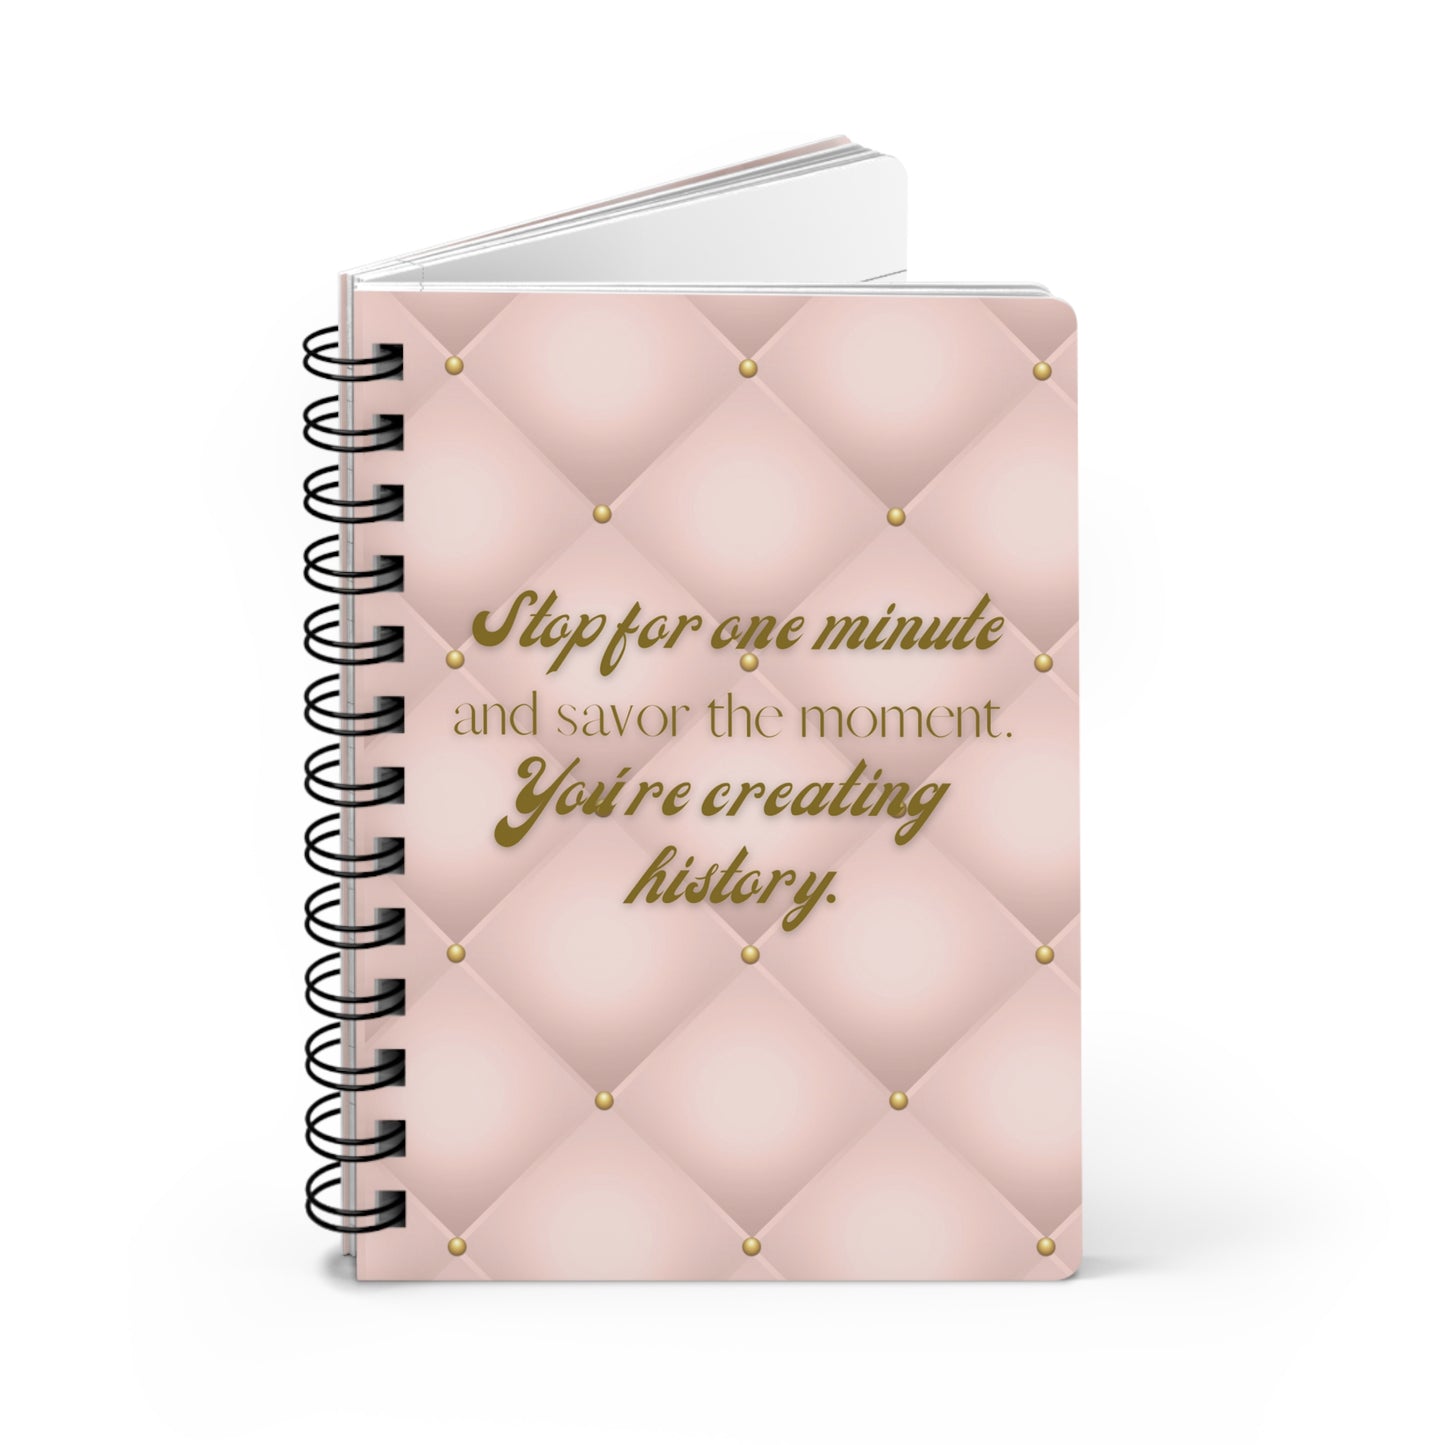 Stop for one minute Tufted Print Light Grayish Red and Gold Spiral Bound Journal